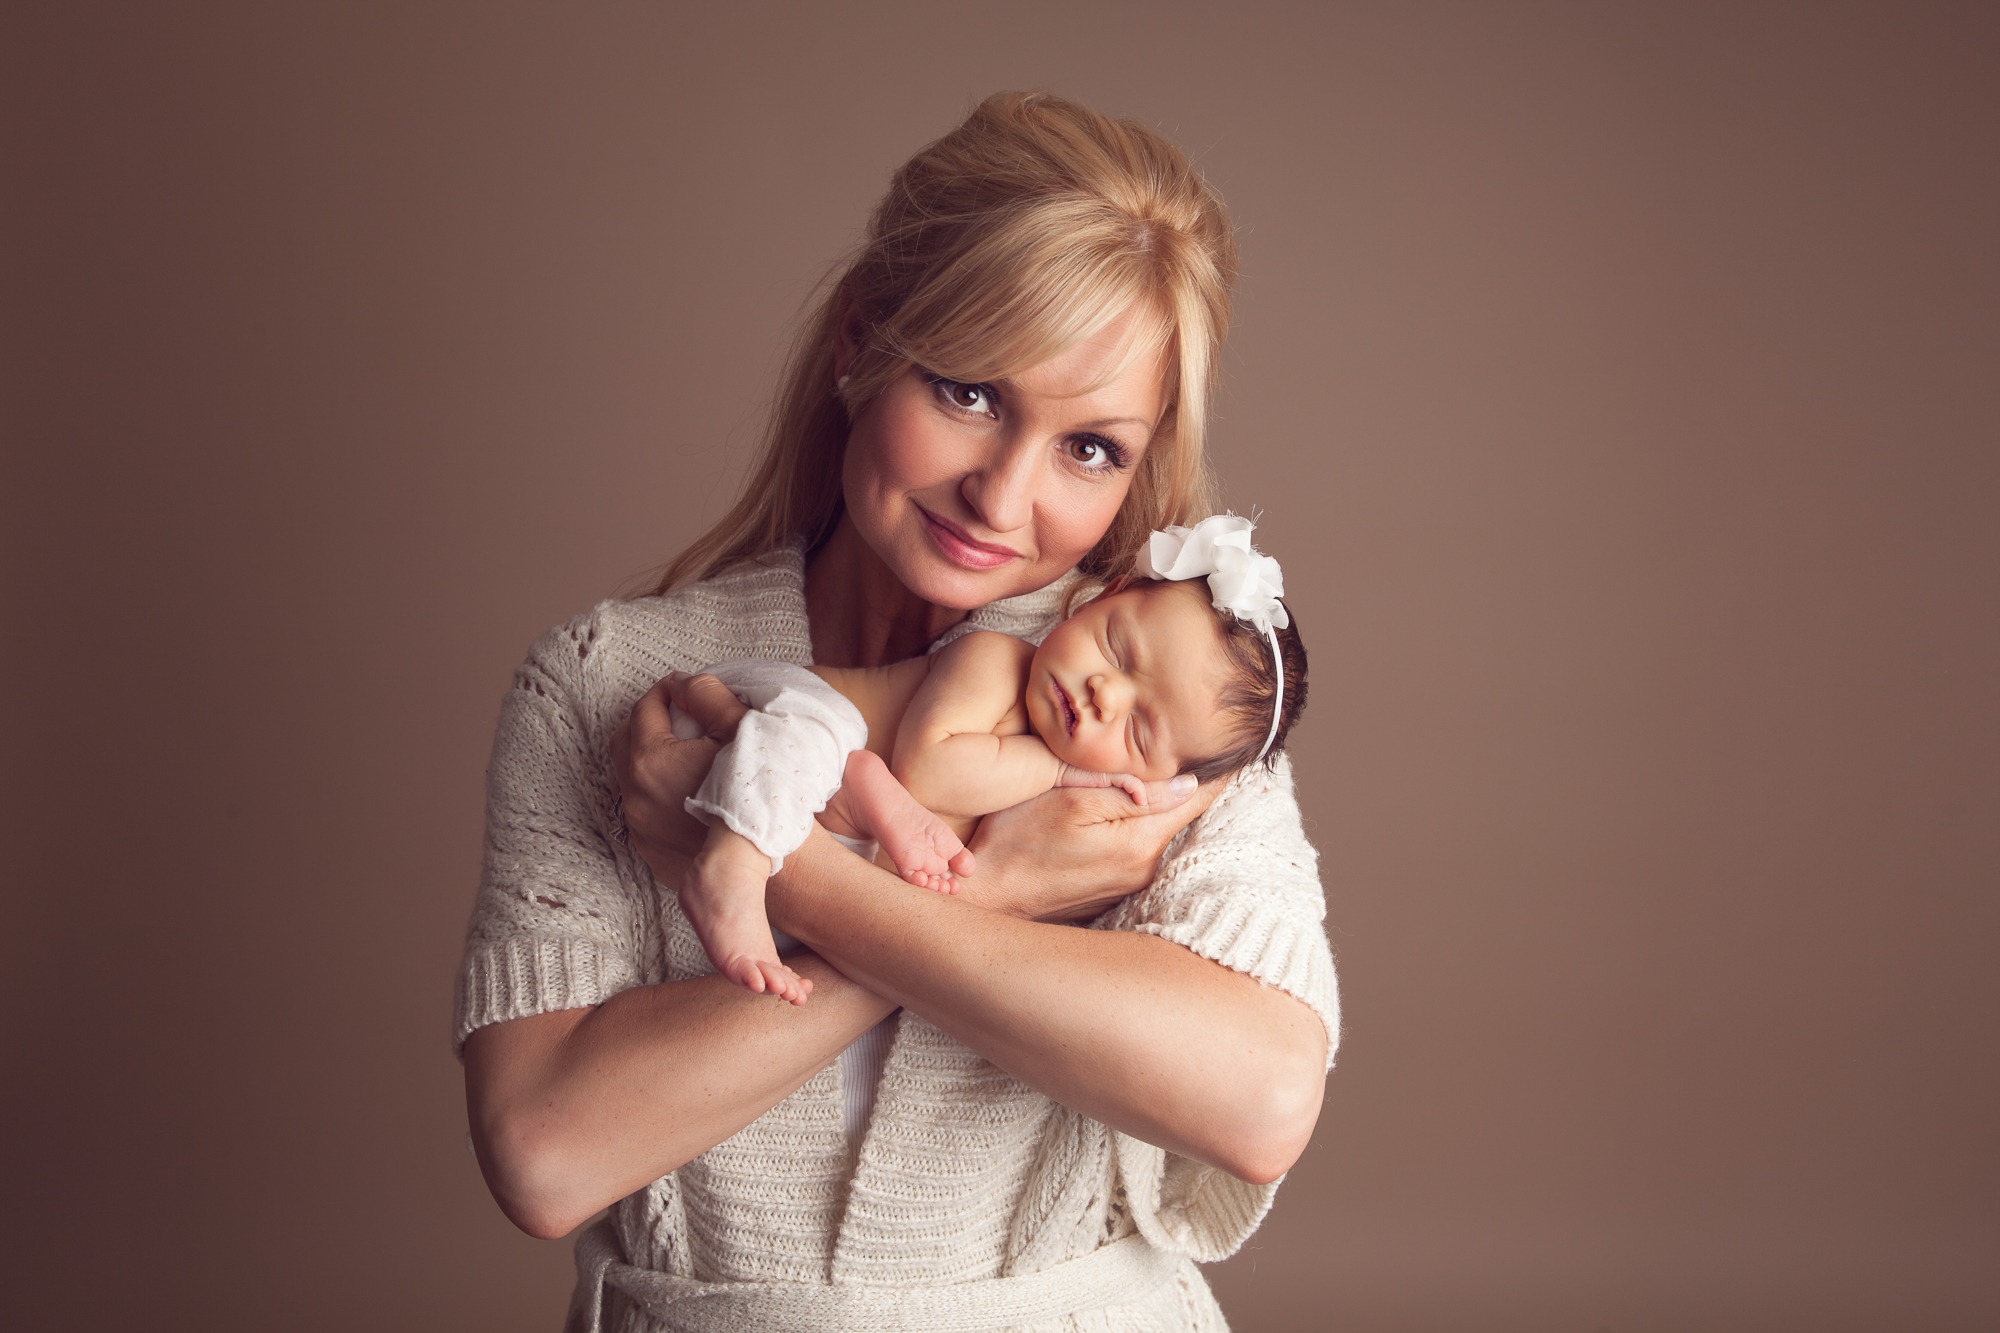 How do I pose for a mother and baby photoshoot? | Samantha Black